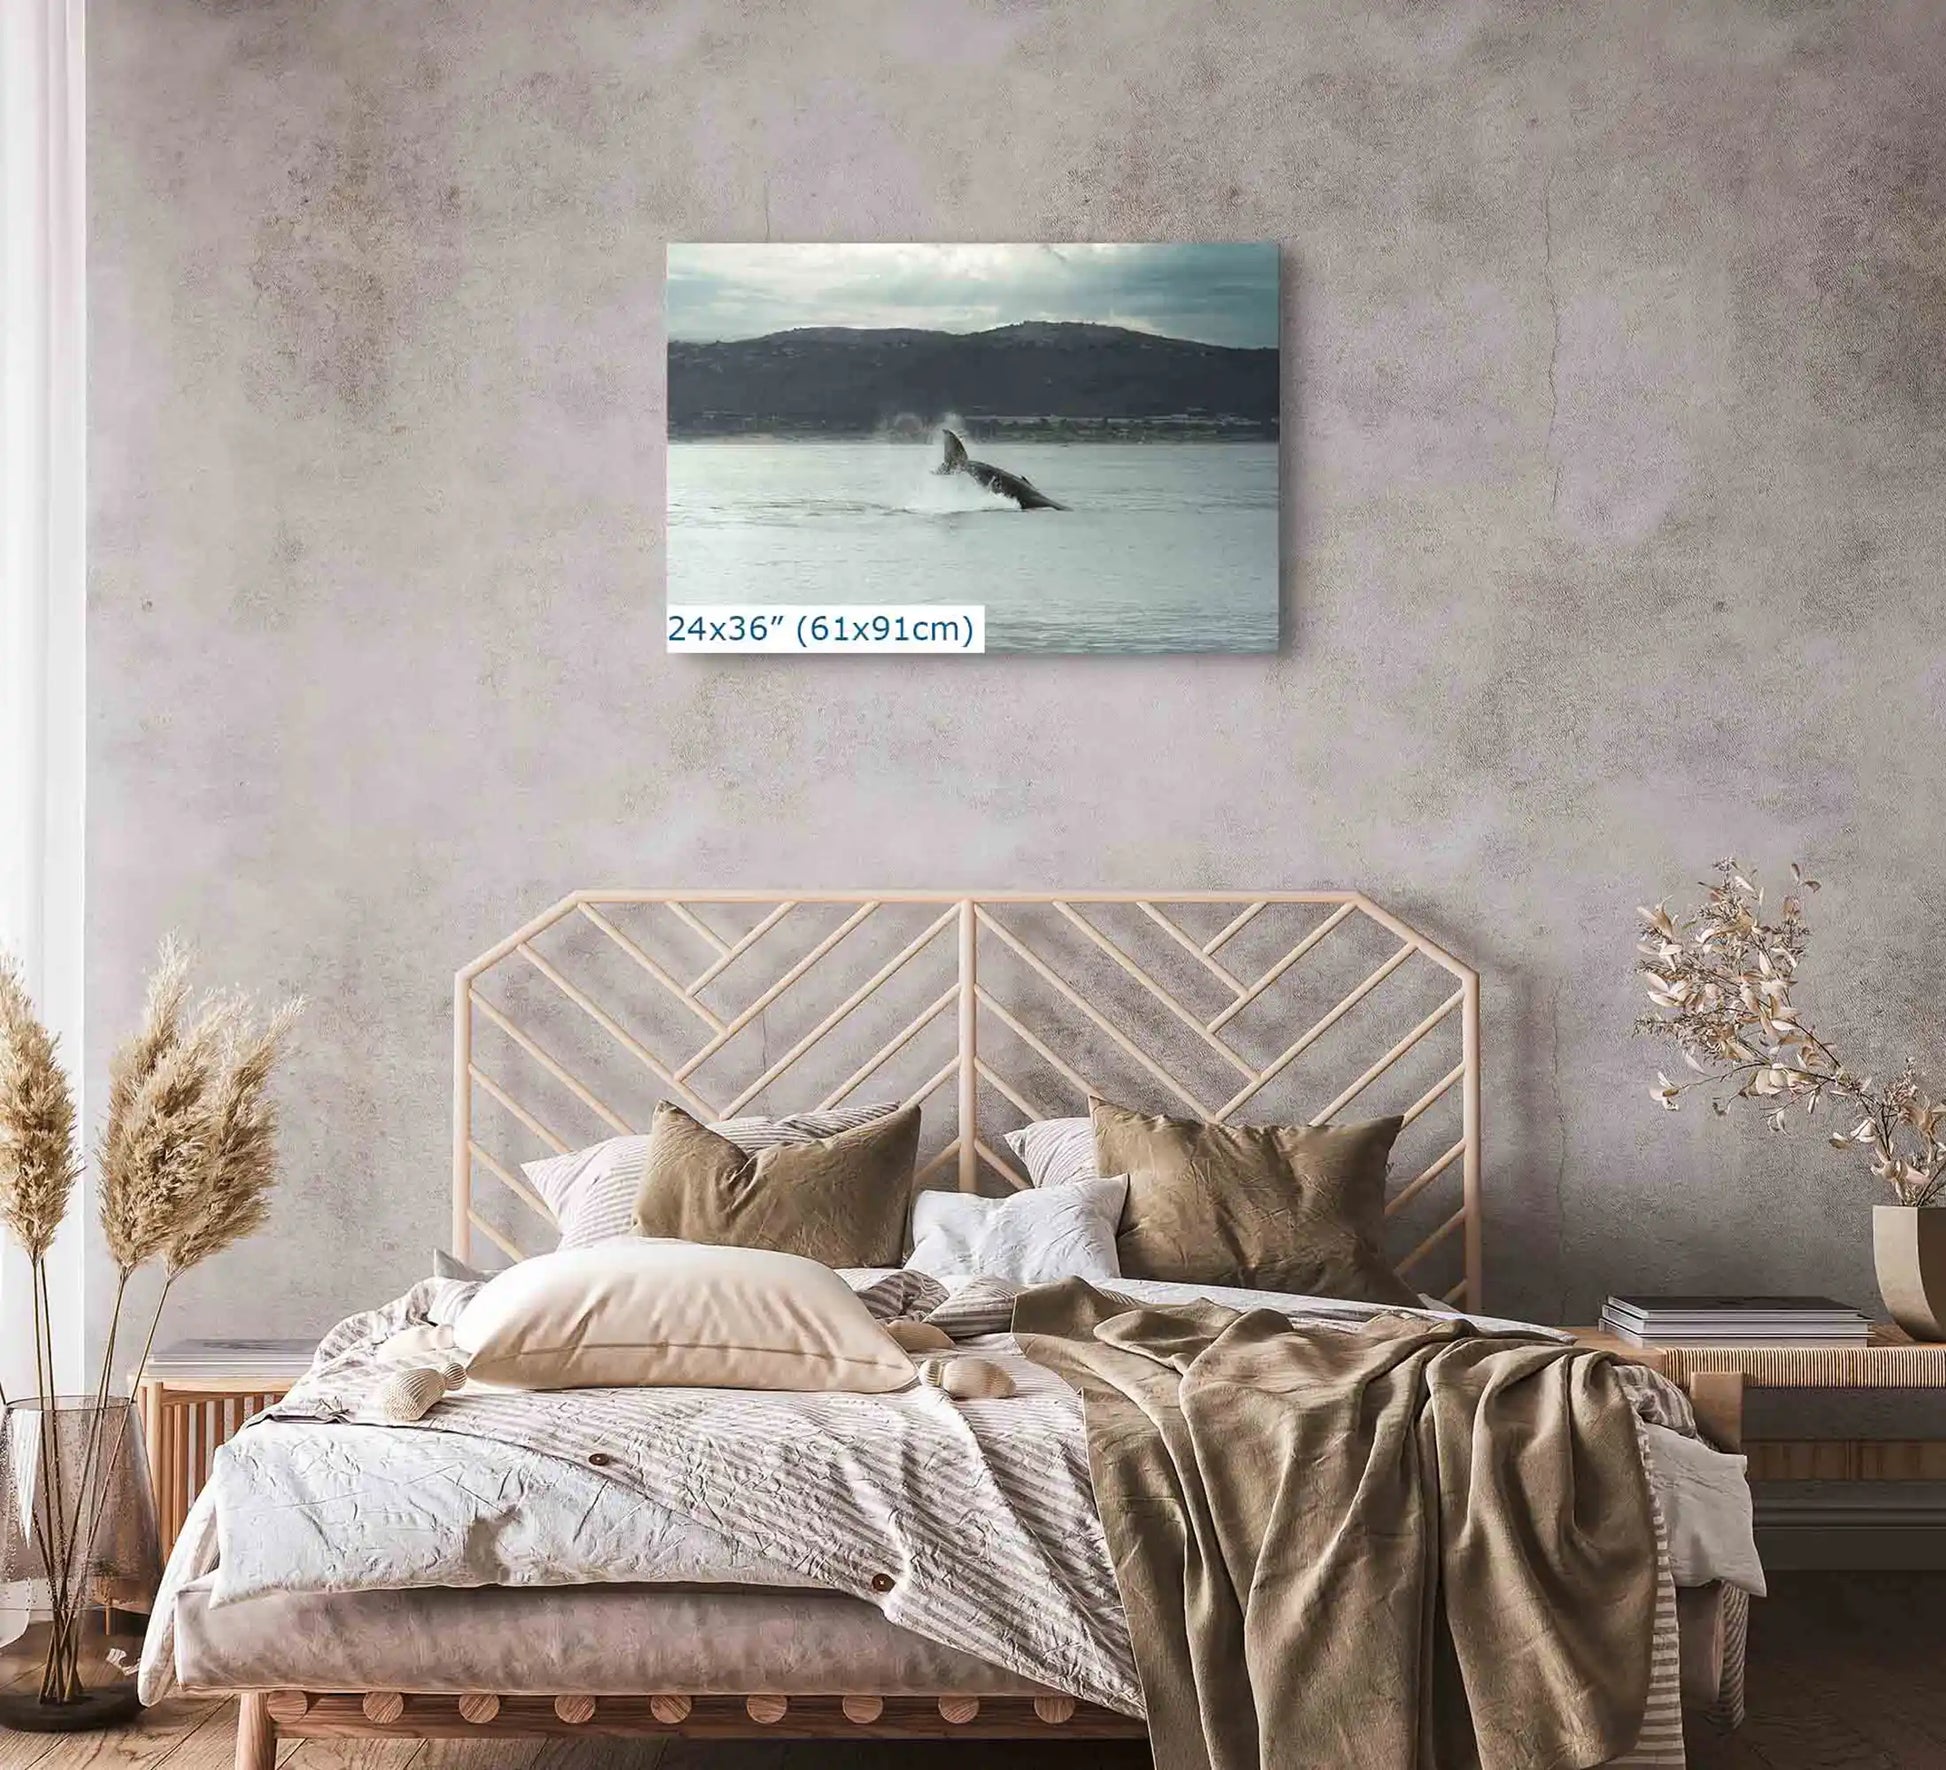 Humpback Whale Fluke as canvas wall decor 24x36-inch in bedroom